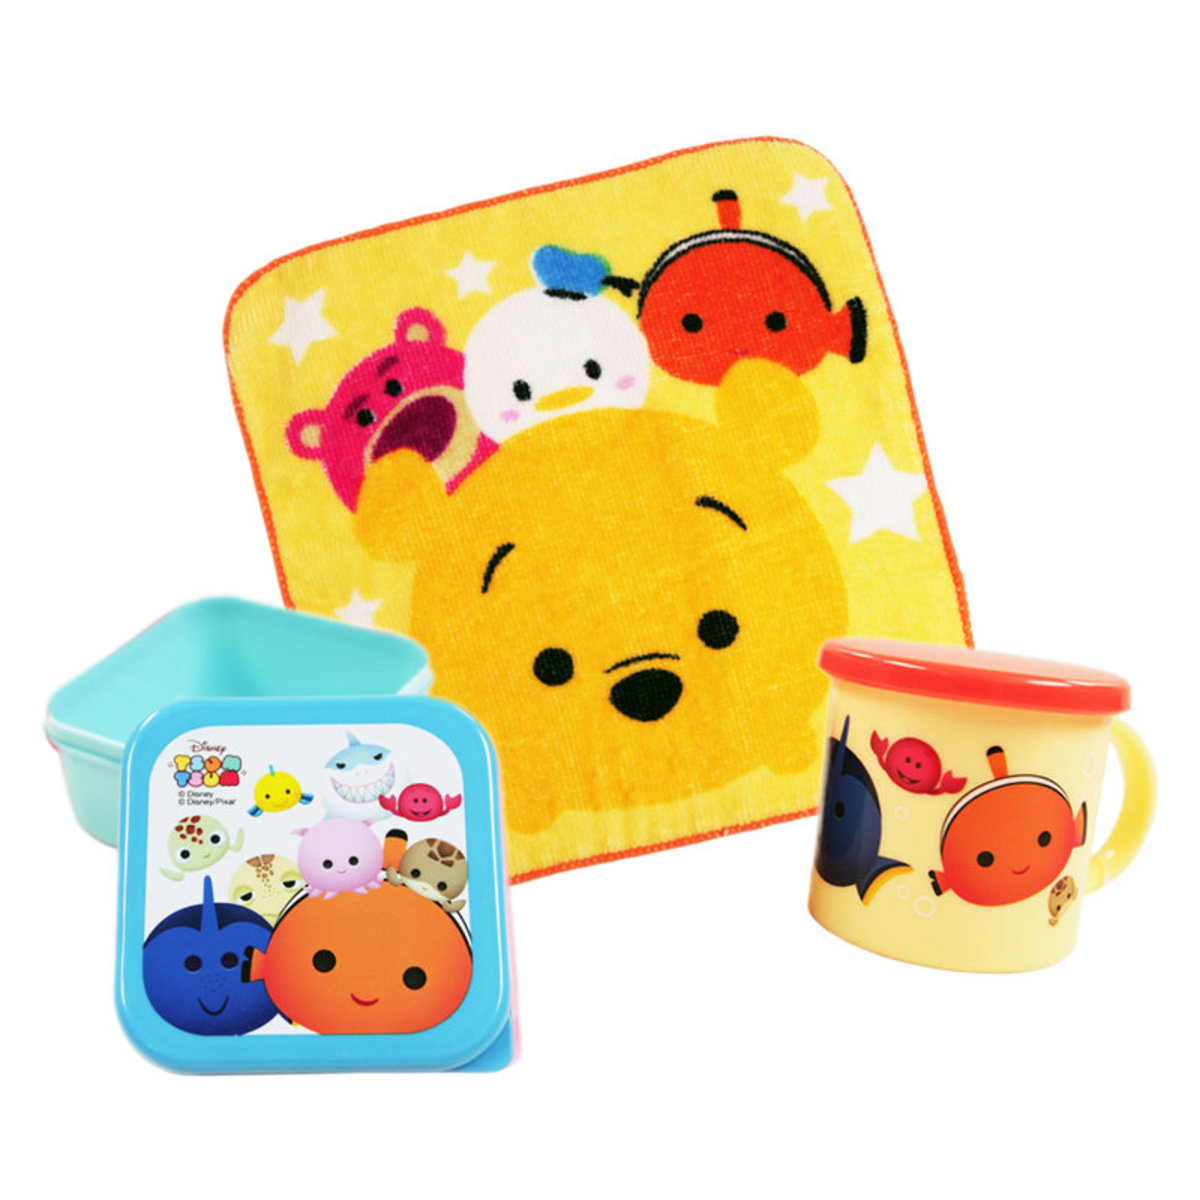 PP Cup + Lunch Box with Towel Set (Nemo) (Licensed by Disney)